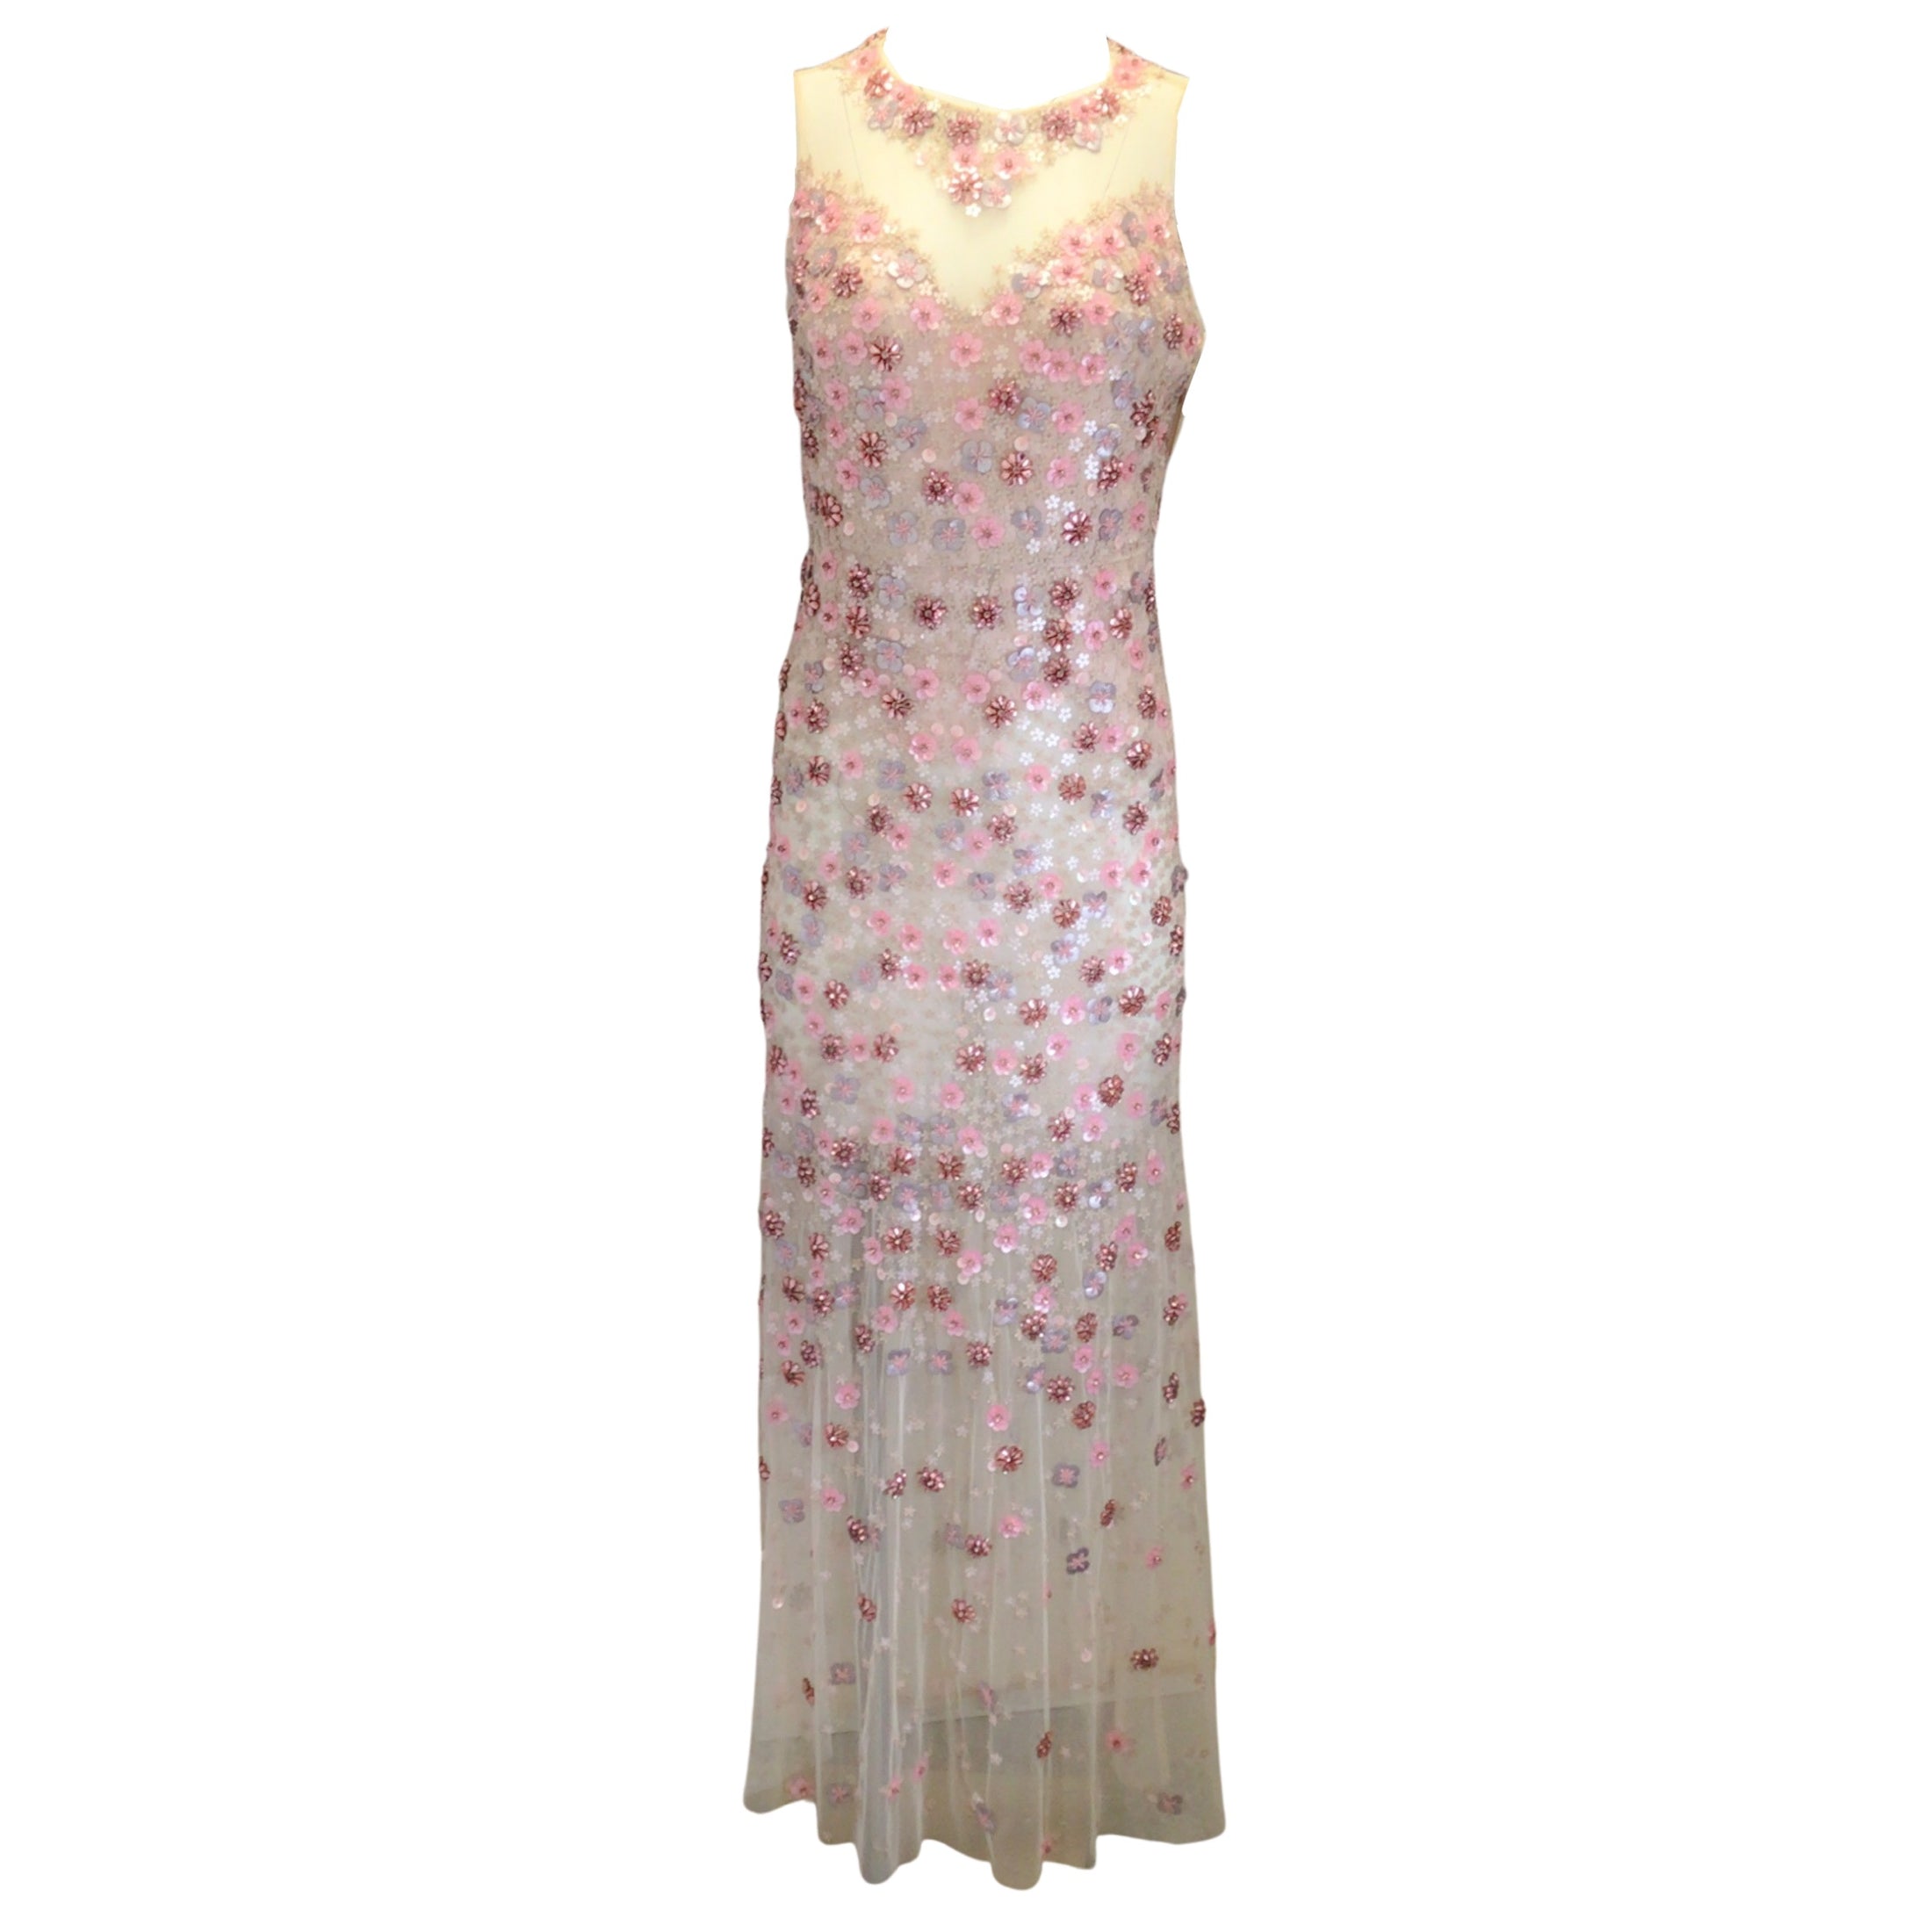 Elie Tahari Pink Augenie Beaded and Floral Sequined Embellished Sleeveless Gown / Formal Dress